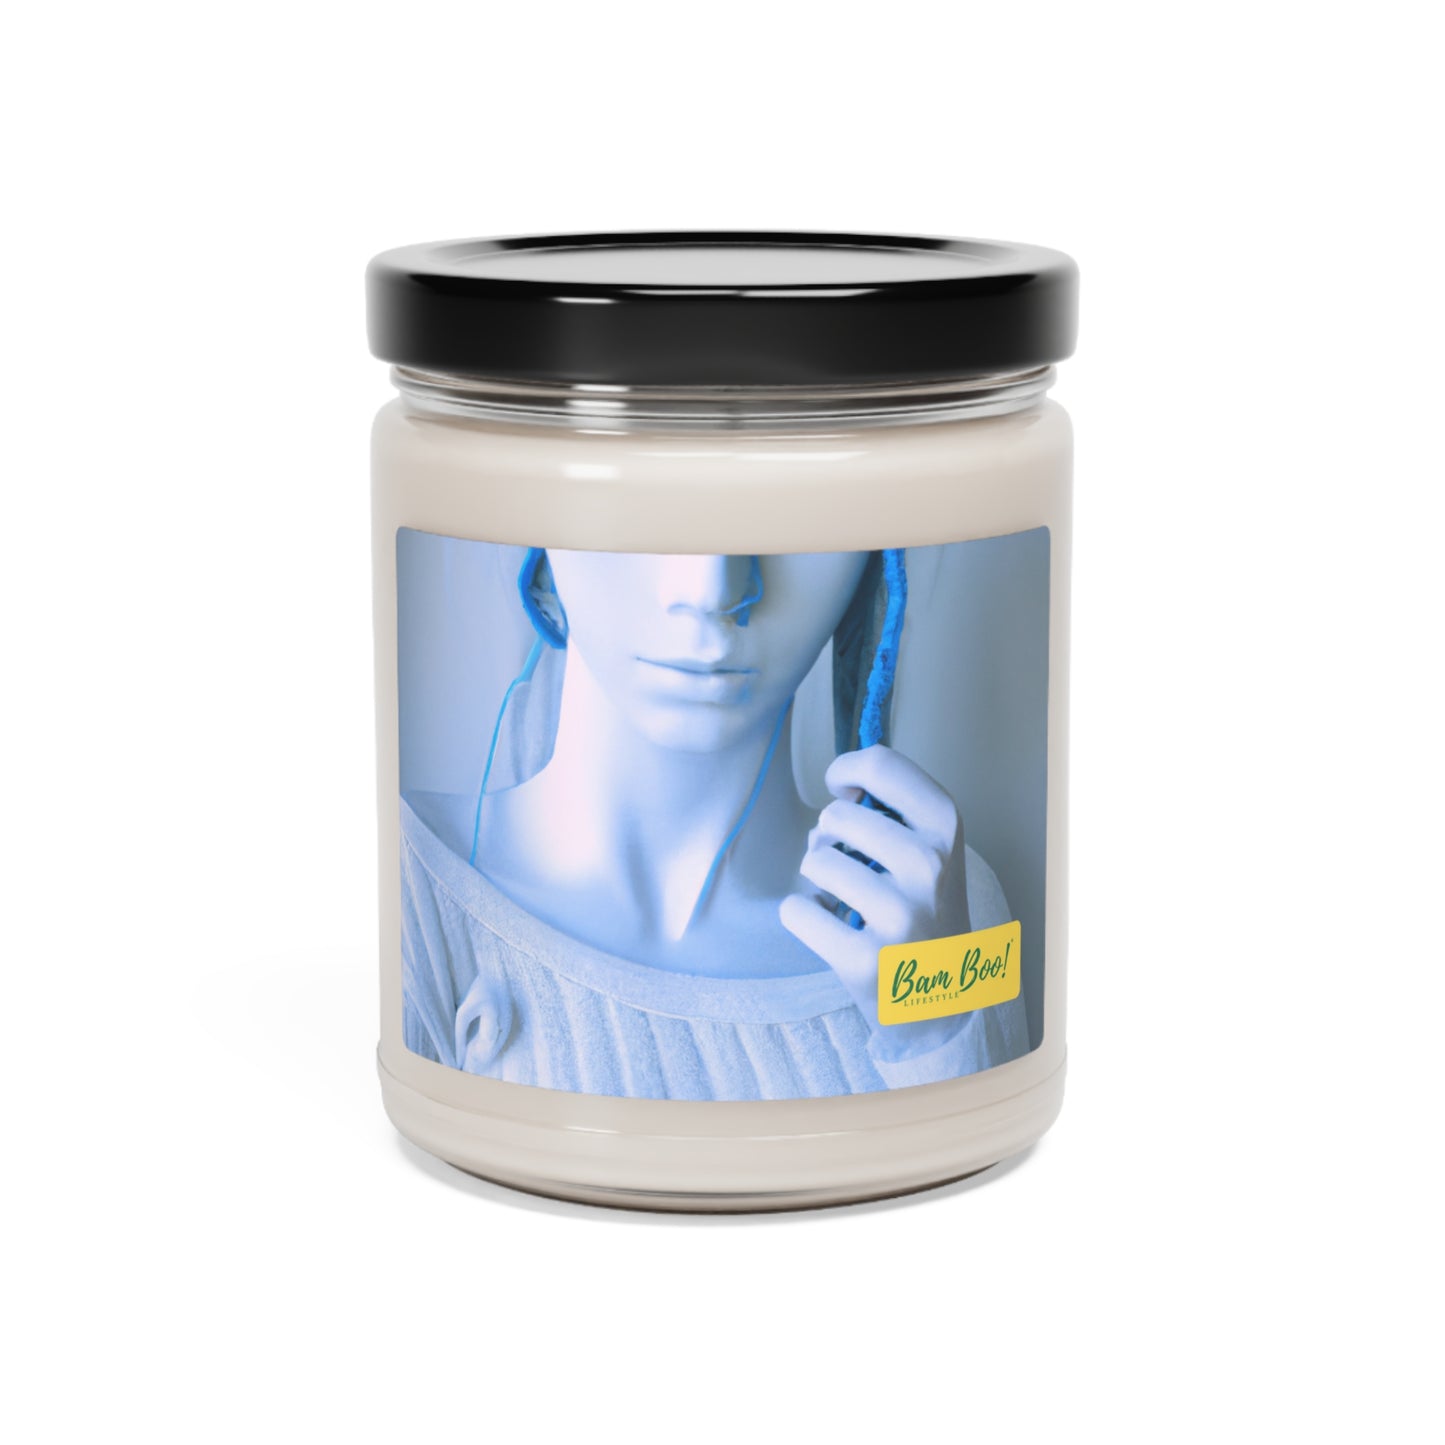 "My Reflection: Capturing What Matters Most" - Bam Boo! Lifestyle Eco-friendly Soy Candle